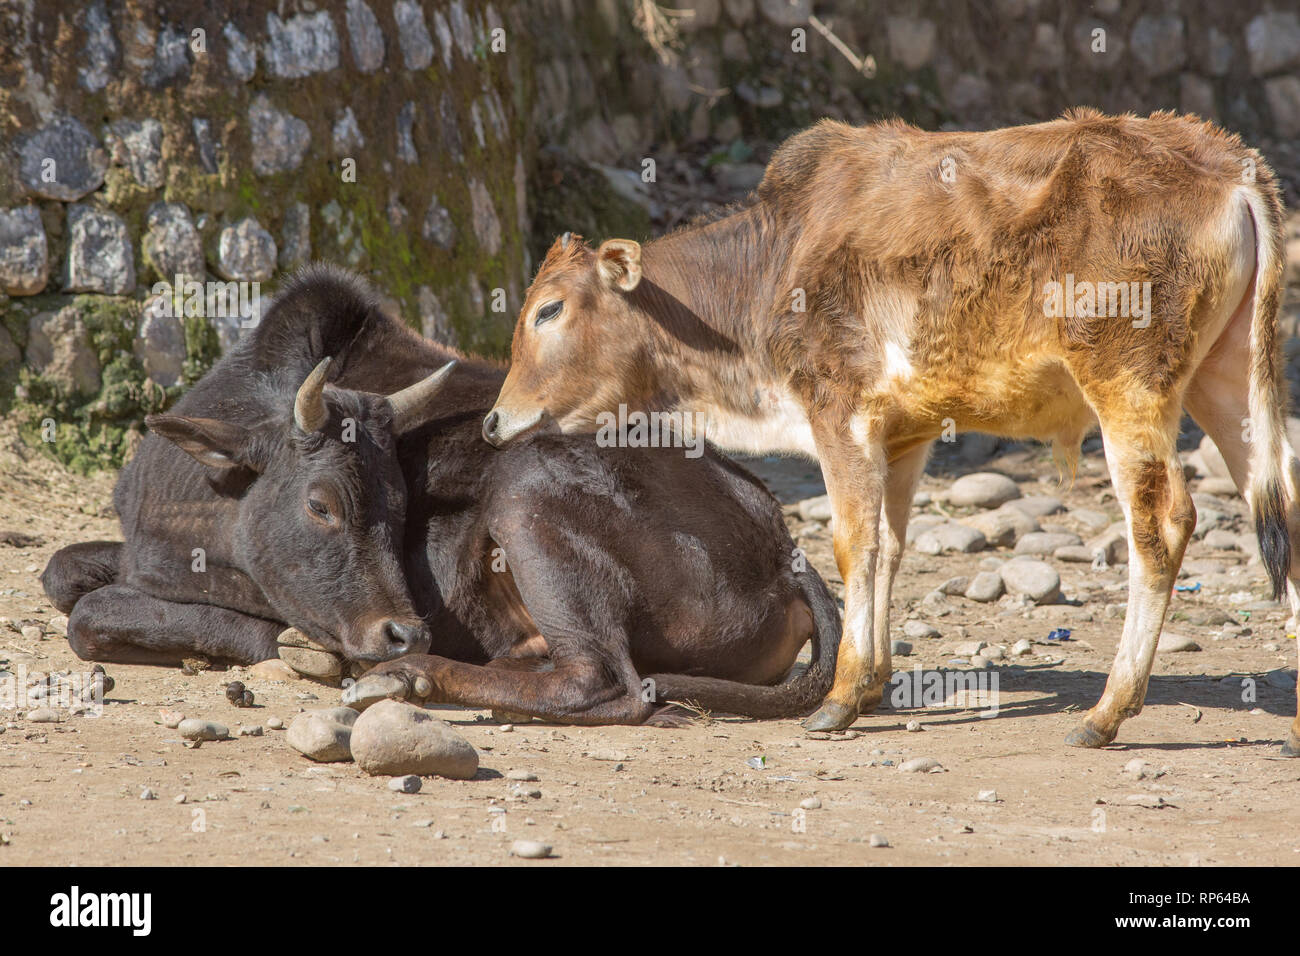 Zebu Cattle (Bos indicus), two bullocks, none confrontational attention, meeting. Behaviour. Stock Photo